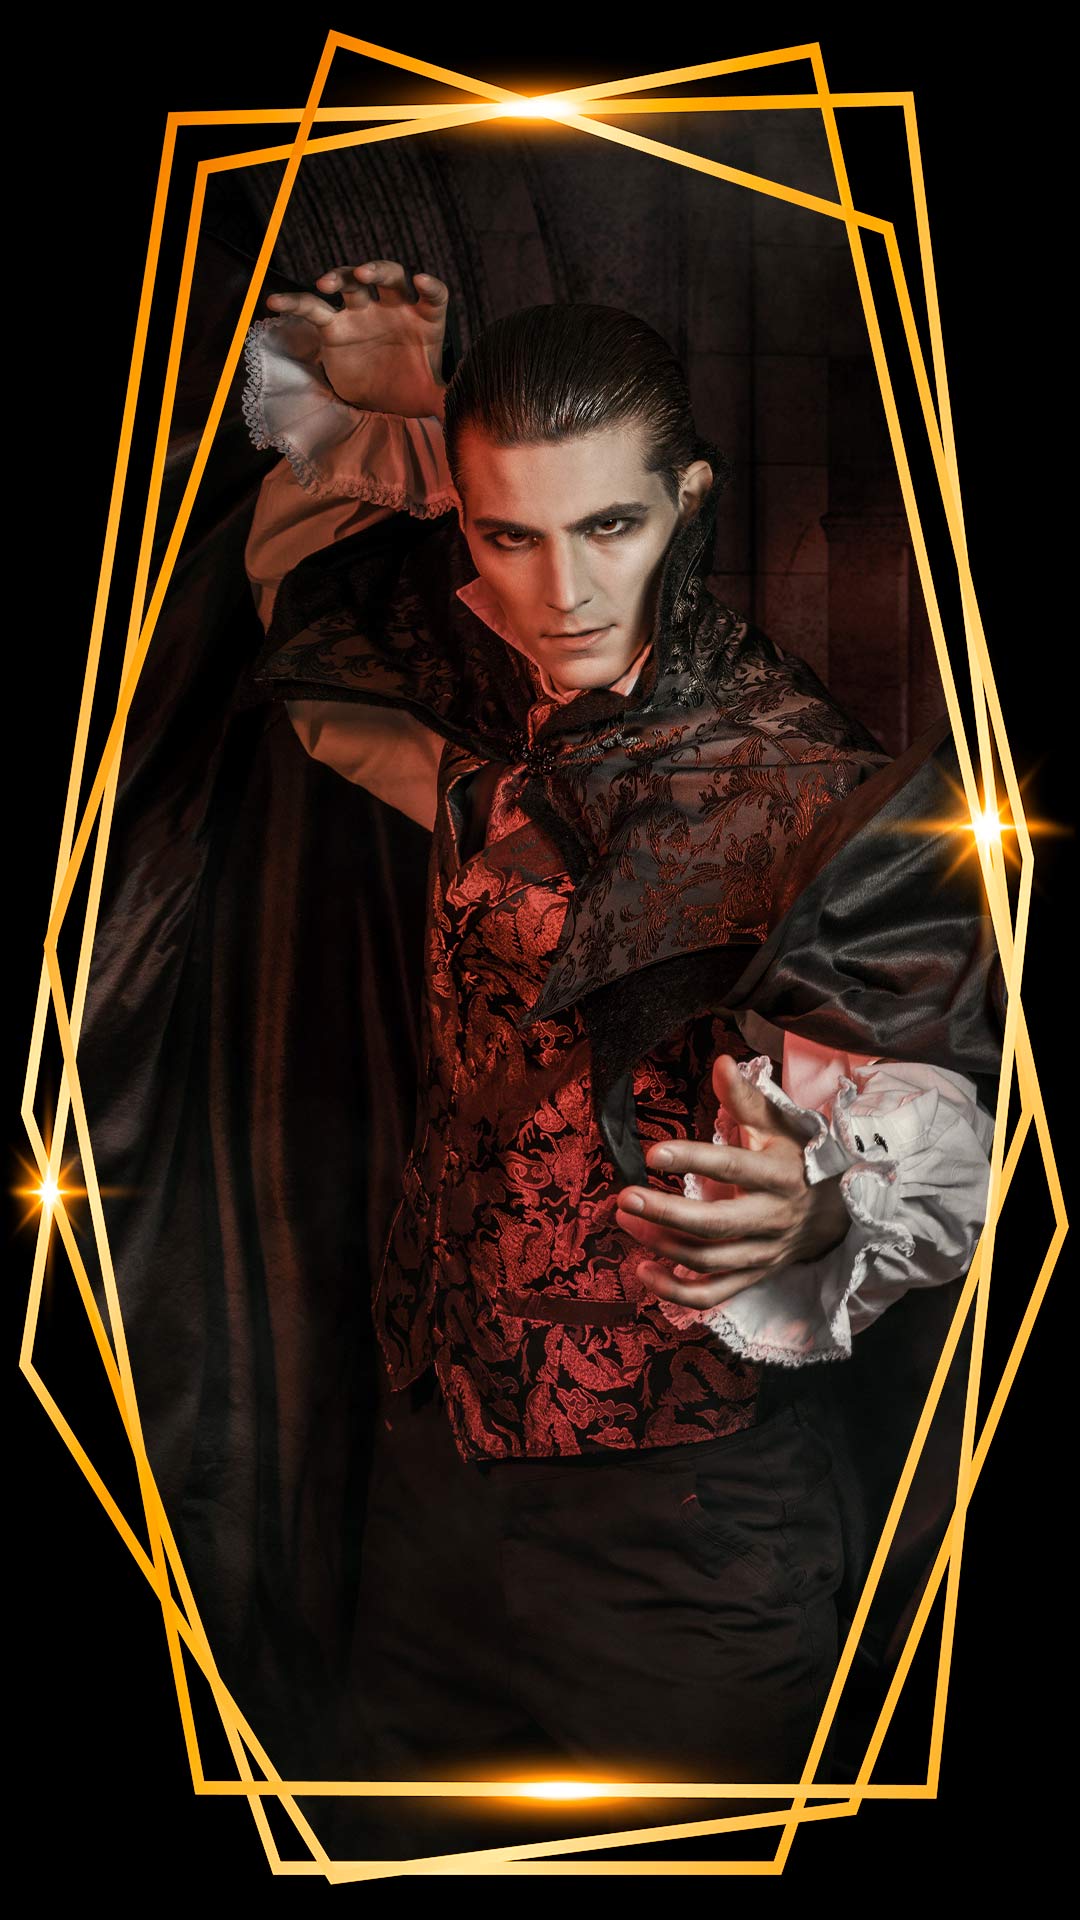 Fantasmagoria’s vampire customer dressed in a Royal Victorian Gothic men’s outfit